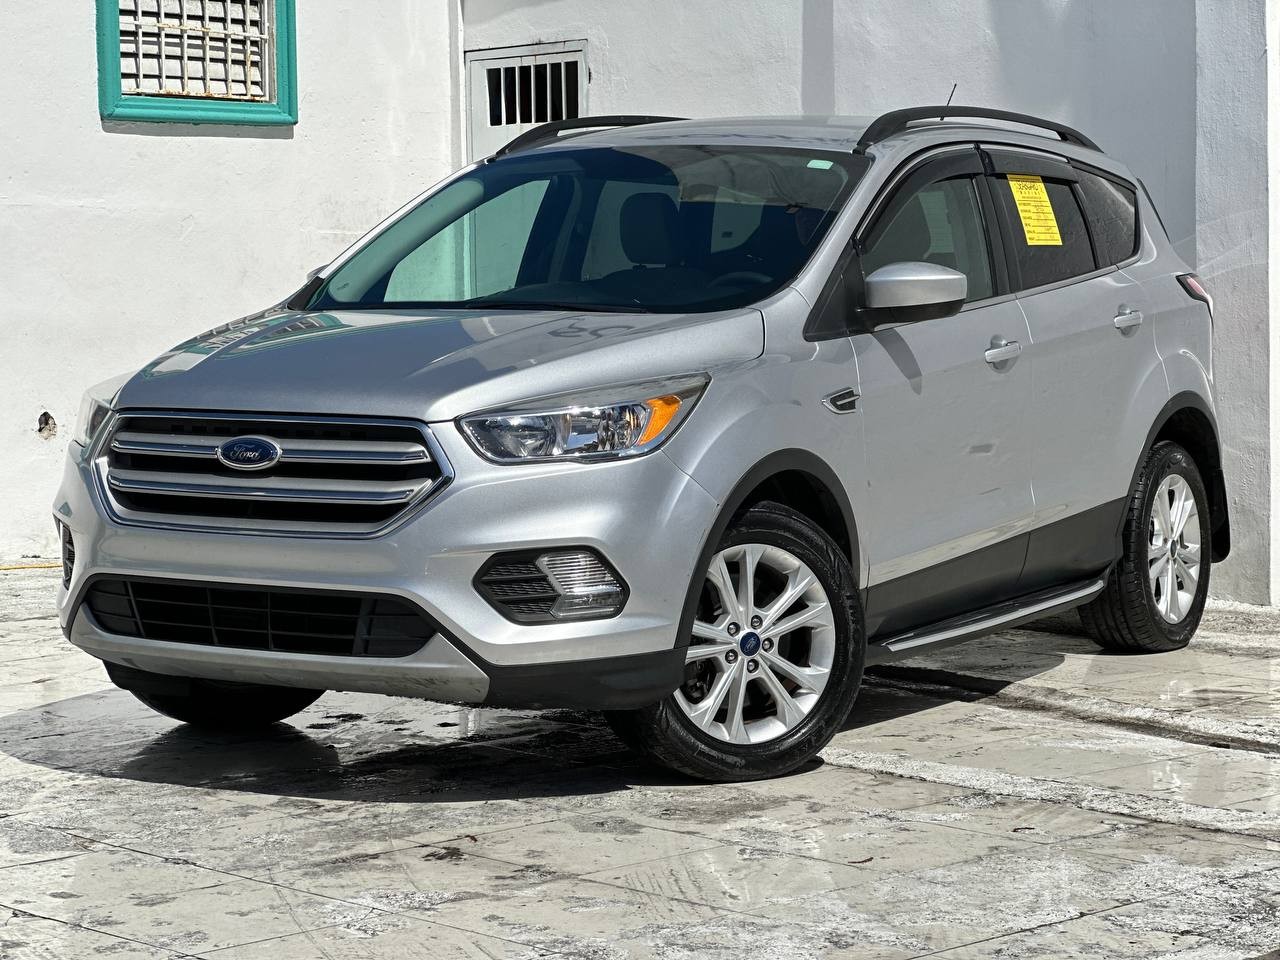 jeepetas y camionetas - FORD ESCAPE Ecoboost turbo 2018CLEAN CARFAX 2